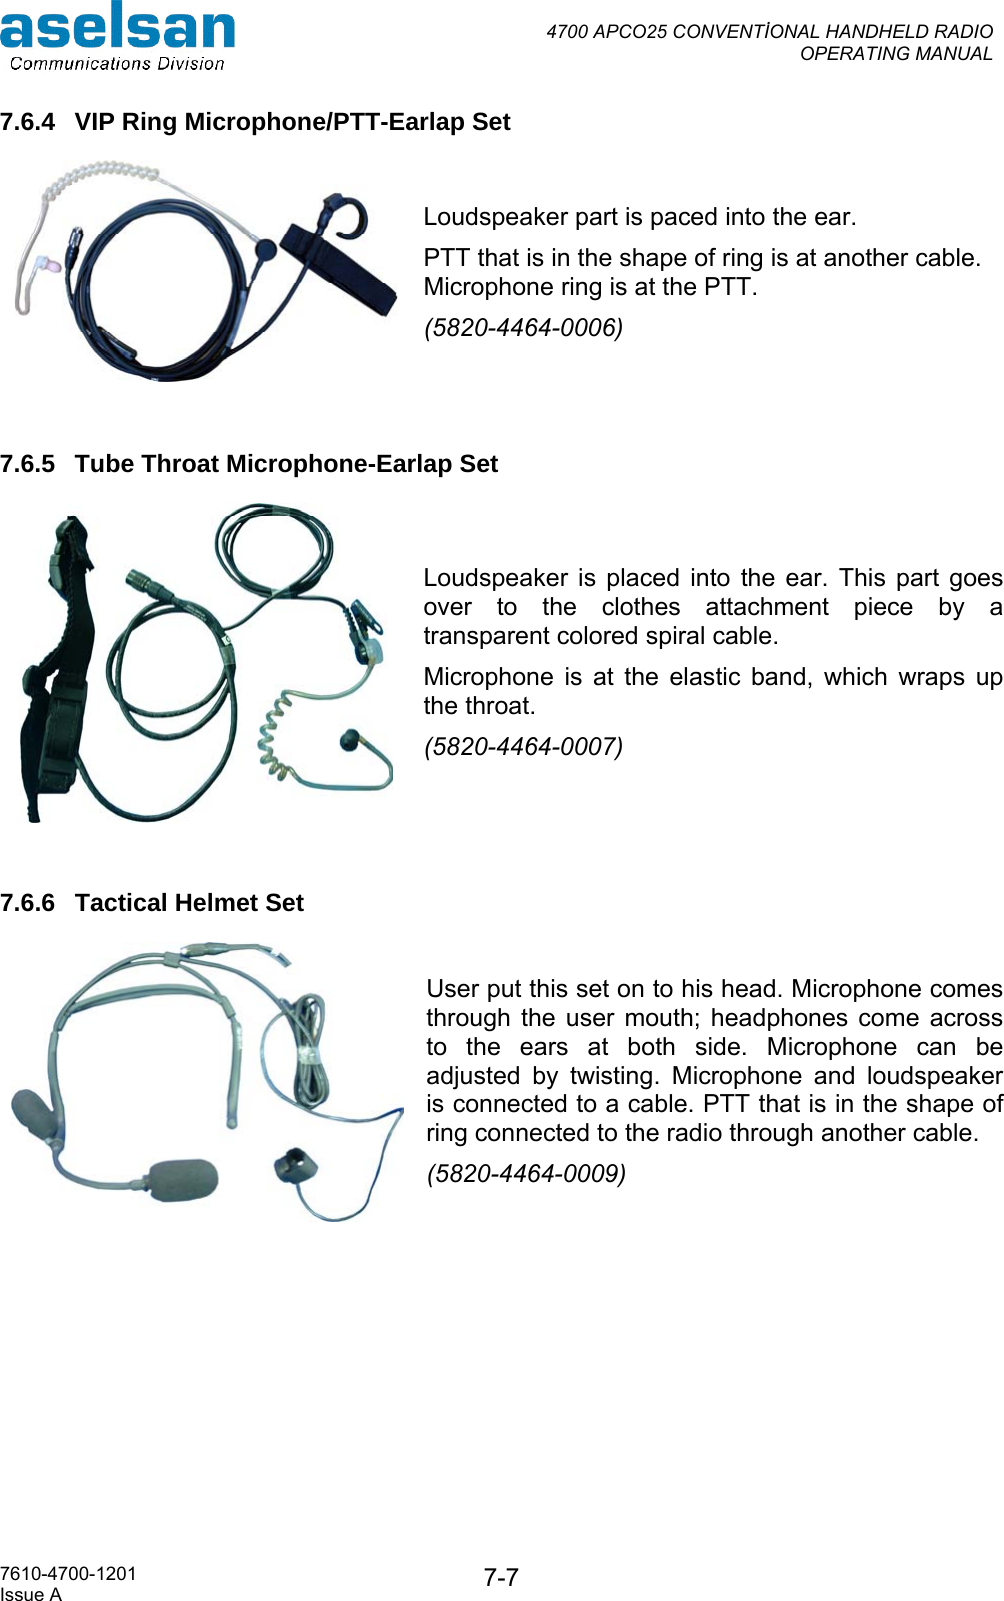  4700 APCO25 CONVENTİONAL HANDHELD RADIO  OPERATING MANUAL   7610-4700-1201 Issue A  7-77.6.4  VIP Ring Microphone/PTT-Earlap Set    Loudspeaker part is paced into the ear. PTT that is in the shape of ring is at another cable. Microphone ring is at the PTT. (5820-4464-0006)   7.6.5  Tube Throat Microphone-Earlap Set   Loudspeaker is placed into the ear. This part goes over to the clothes attachment piece by a transparent colored spiral cable.  Microphone is at the elastic band, which wraps up the throat. (5820-4464-0007)  7.6.6  Tactical Helmet Set User put this set on to his head. Microphone comes through the user mouth; headphones come across to the ears at both side. Microphone can be adjusted by twisting. Microphone and loudspeaker is connected to a cable. PTT that is in the shape of ring connected to the radio through another cable. (5820-4464-0009)         